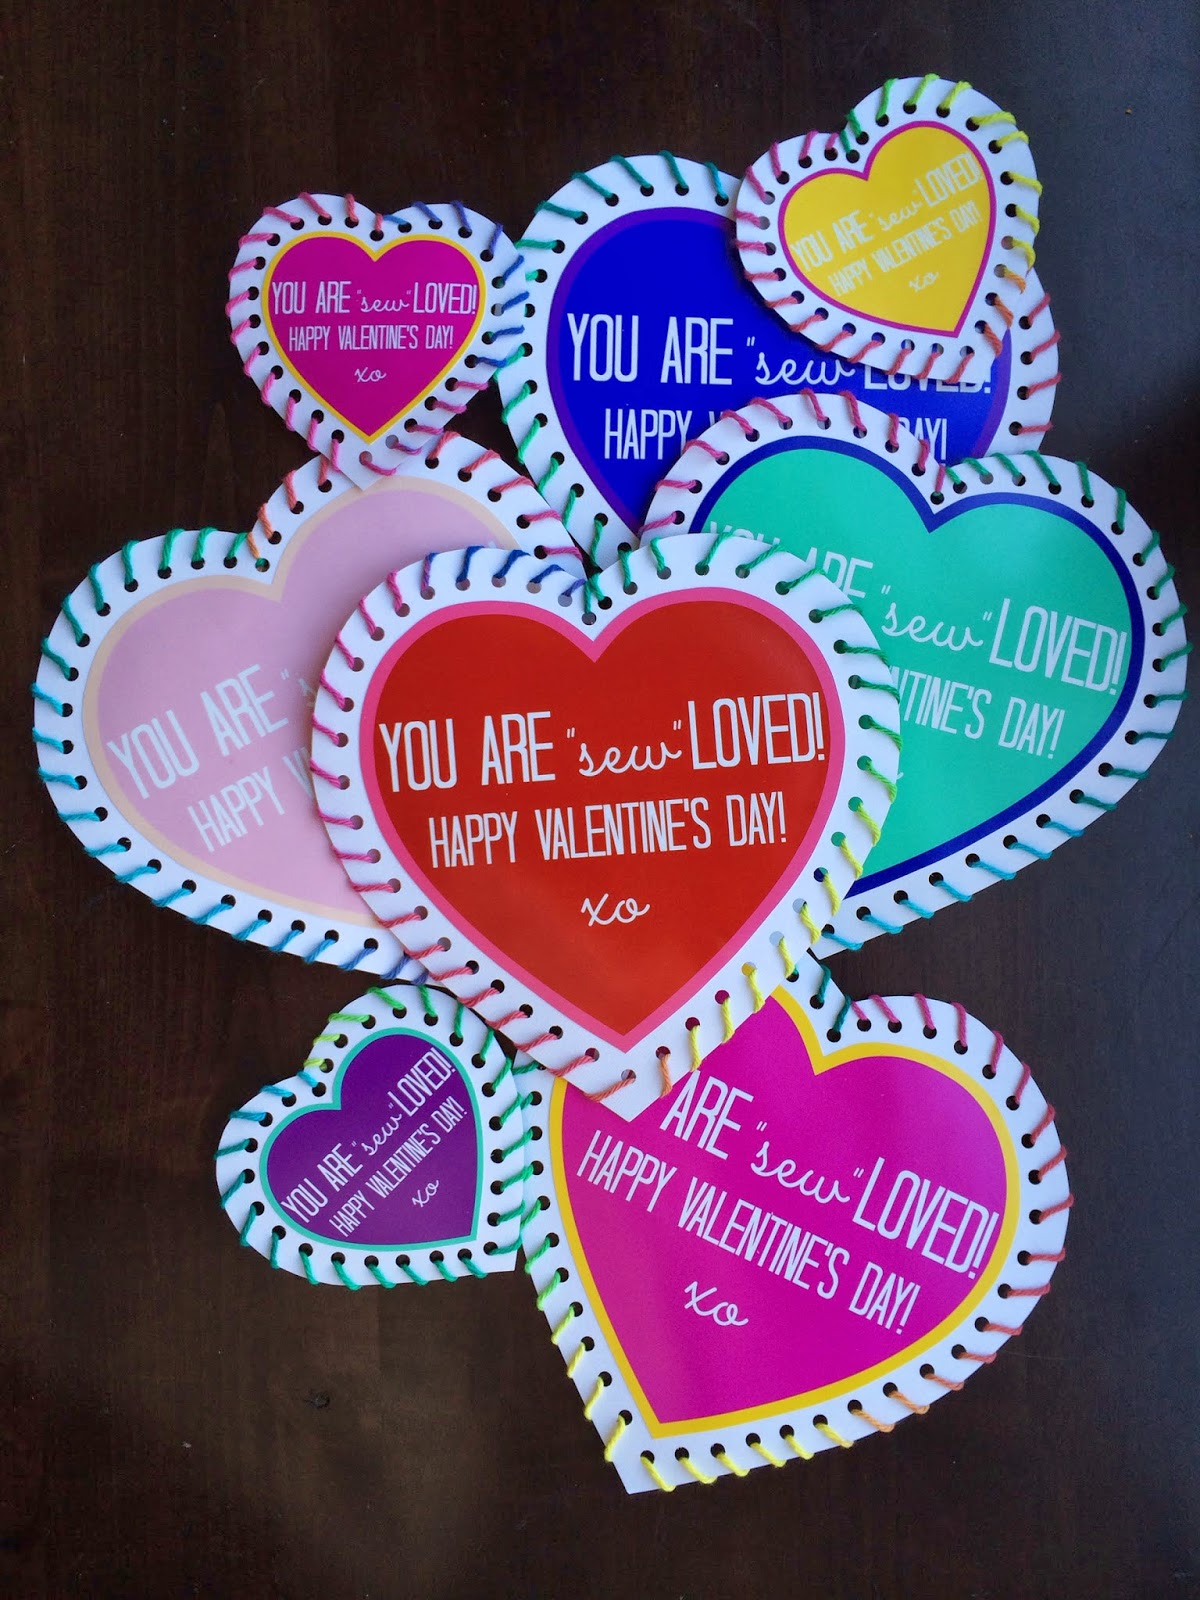 LIFE IS SWEET: Guest Post: You are "sew" loved! (DIY Valentines)